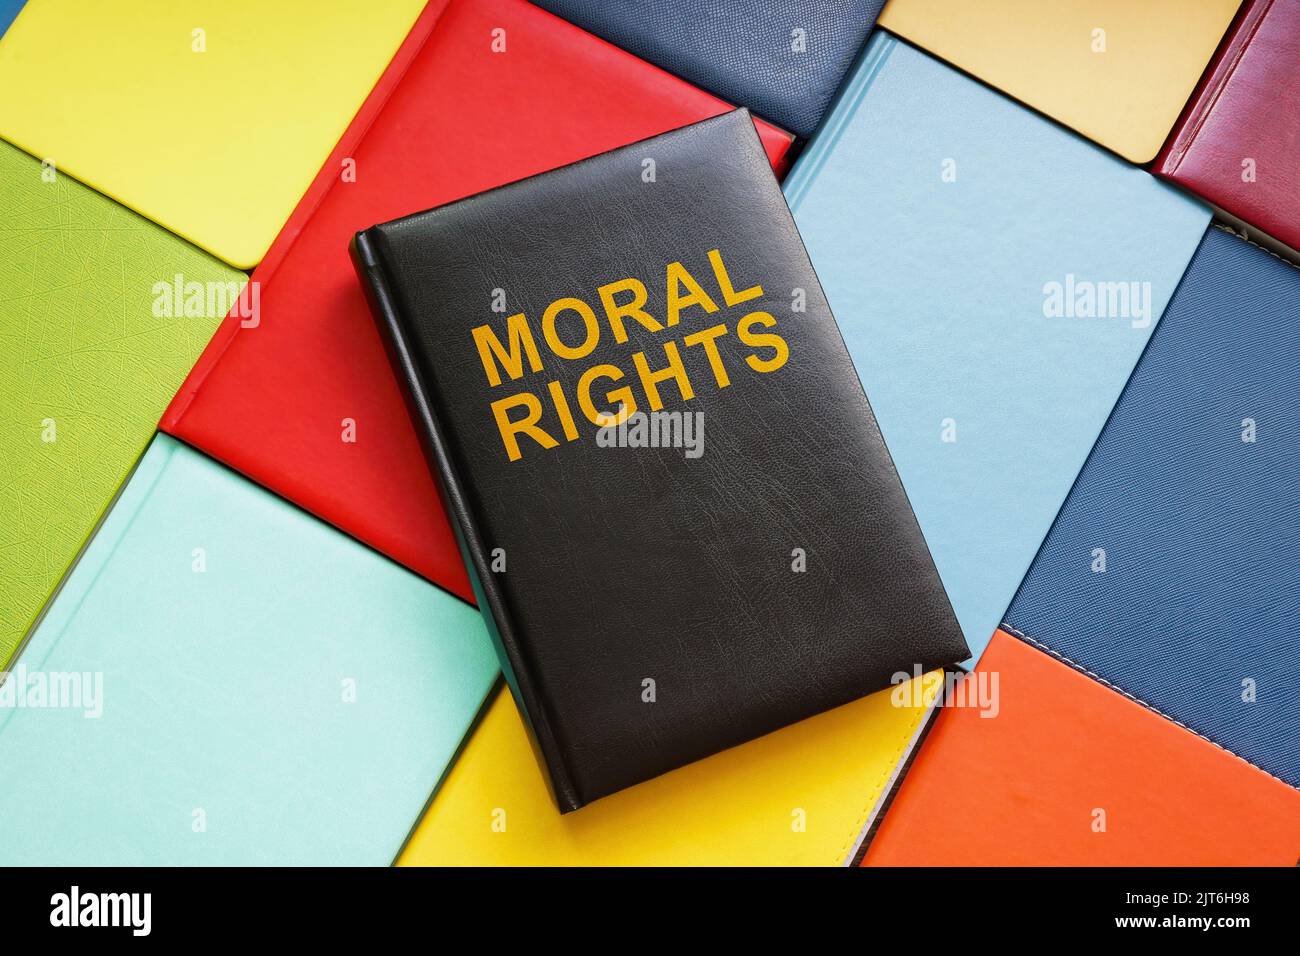 Books and book about moral rights on them. Stock Photo